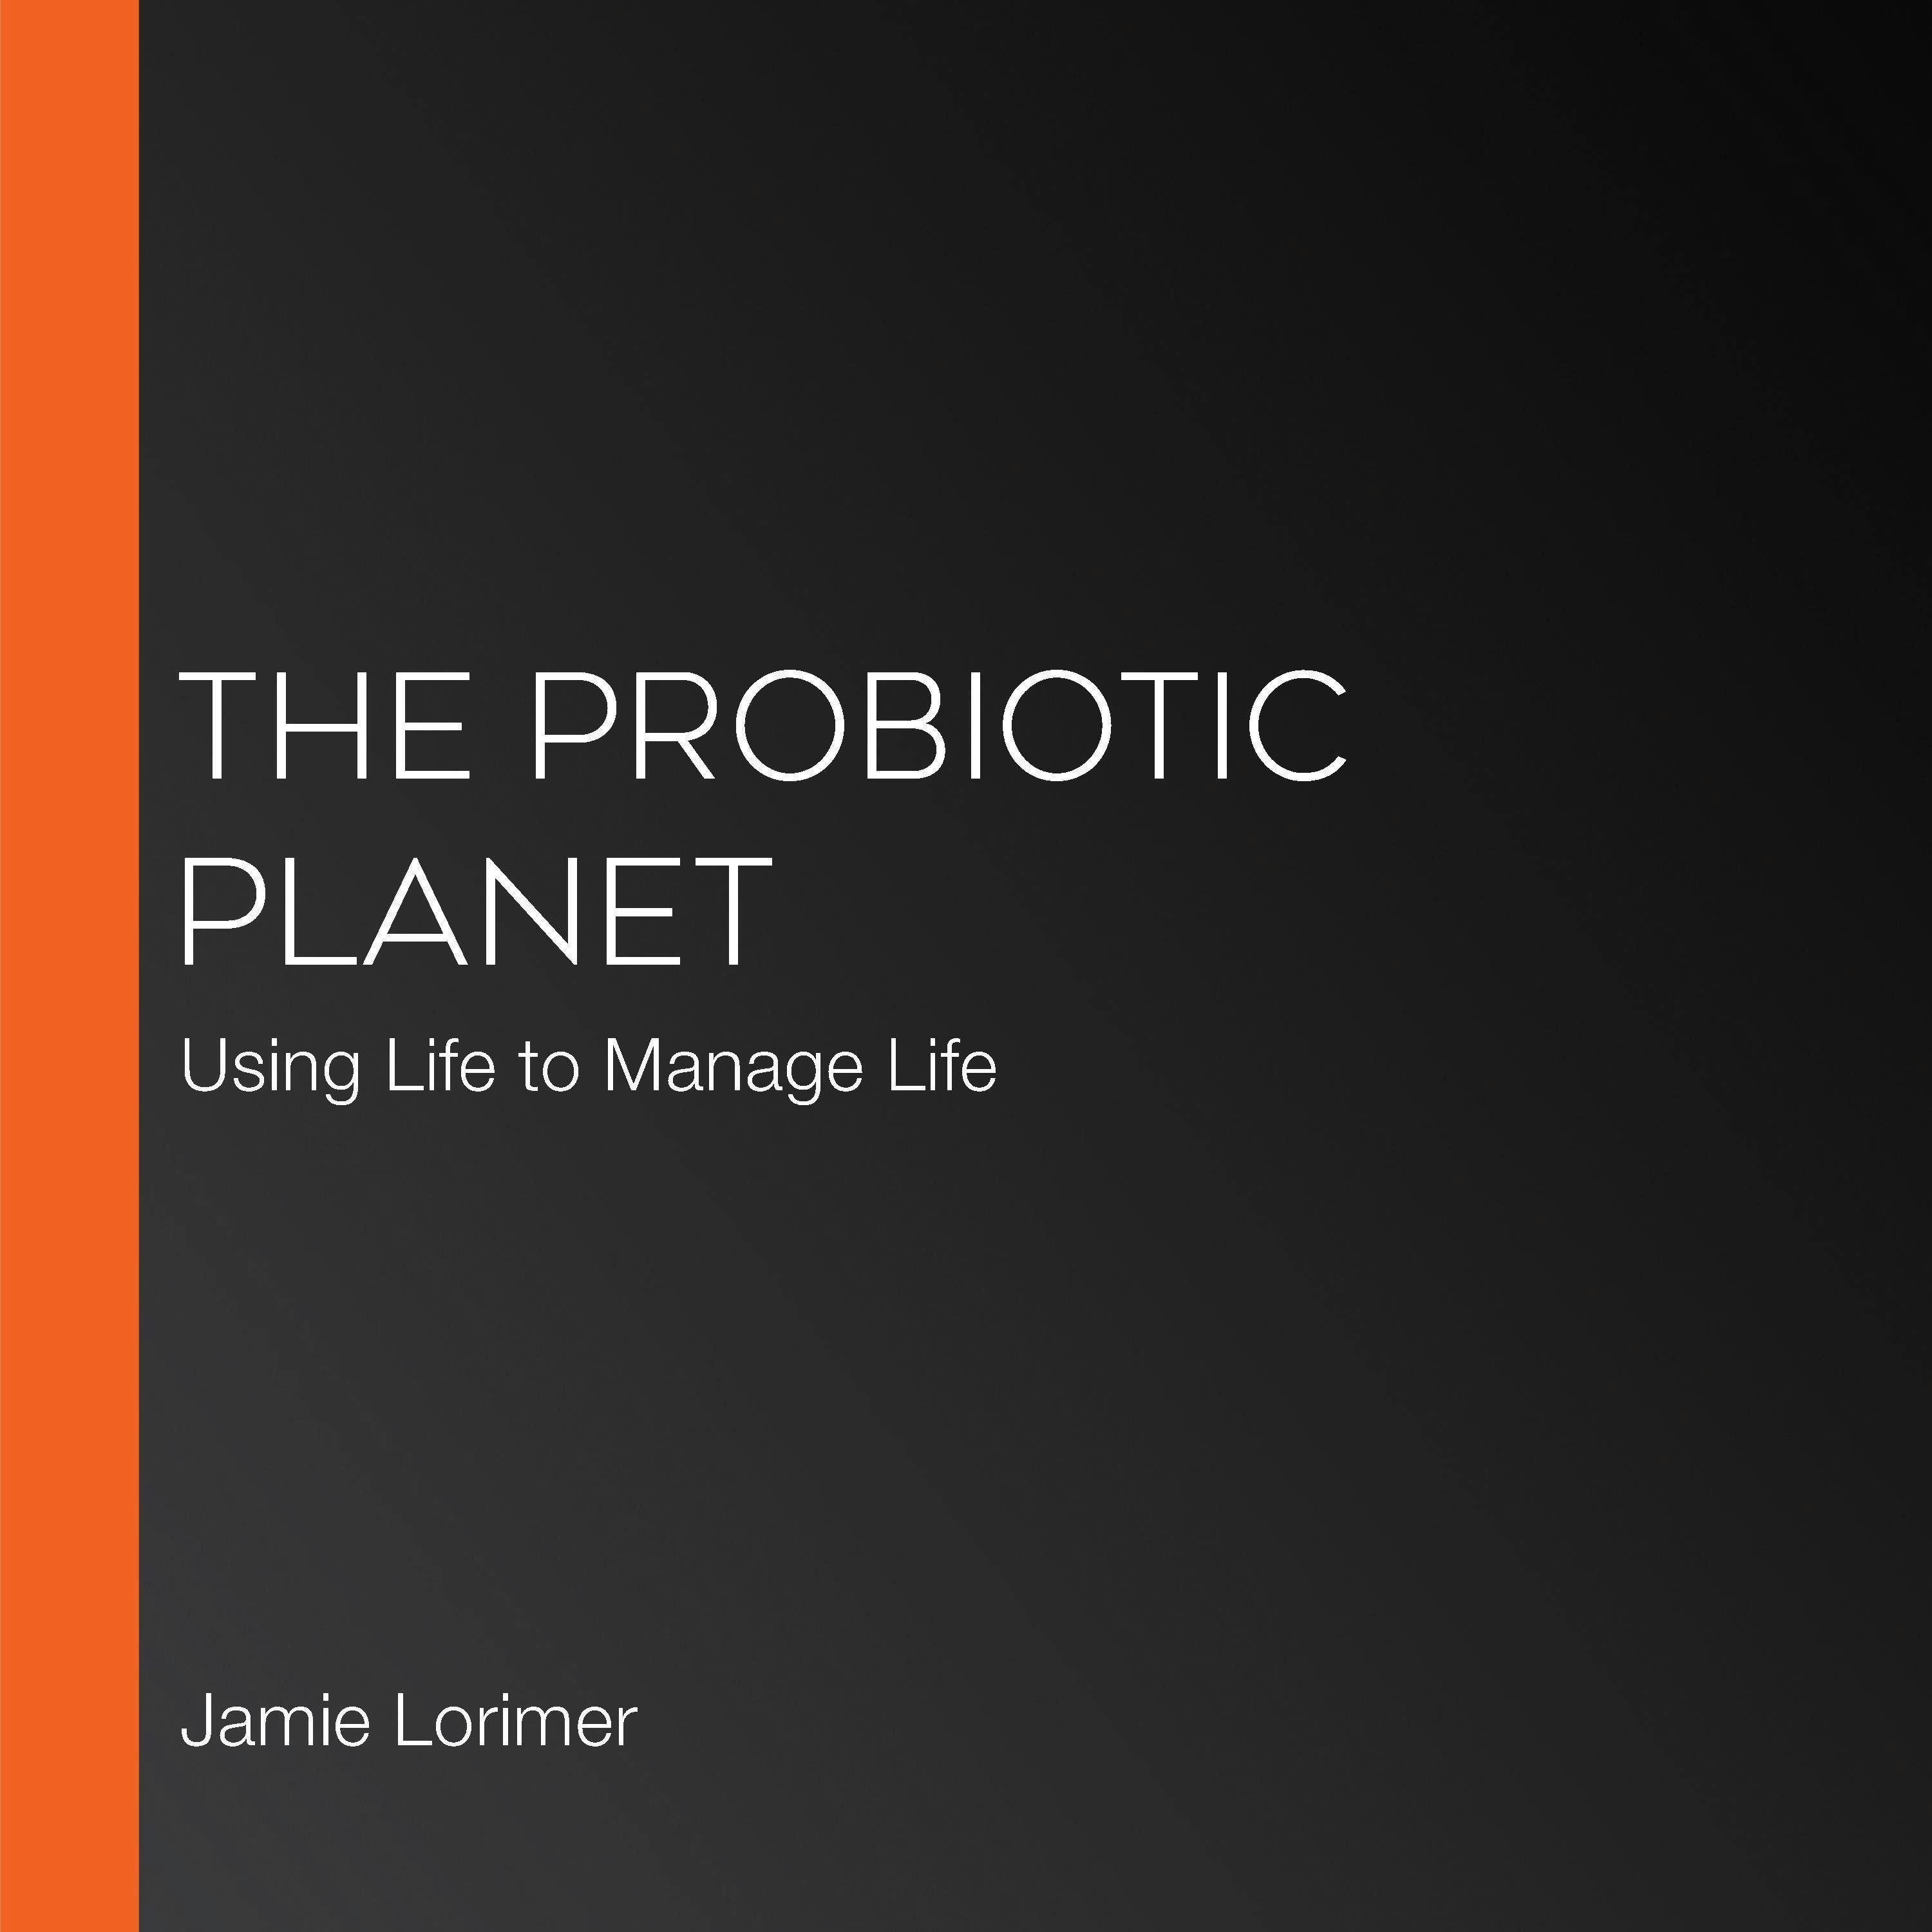 The Probiotic Planet: Using Life to Manage Life - Jamie Lorimer